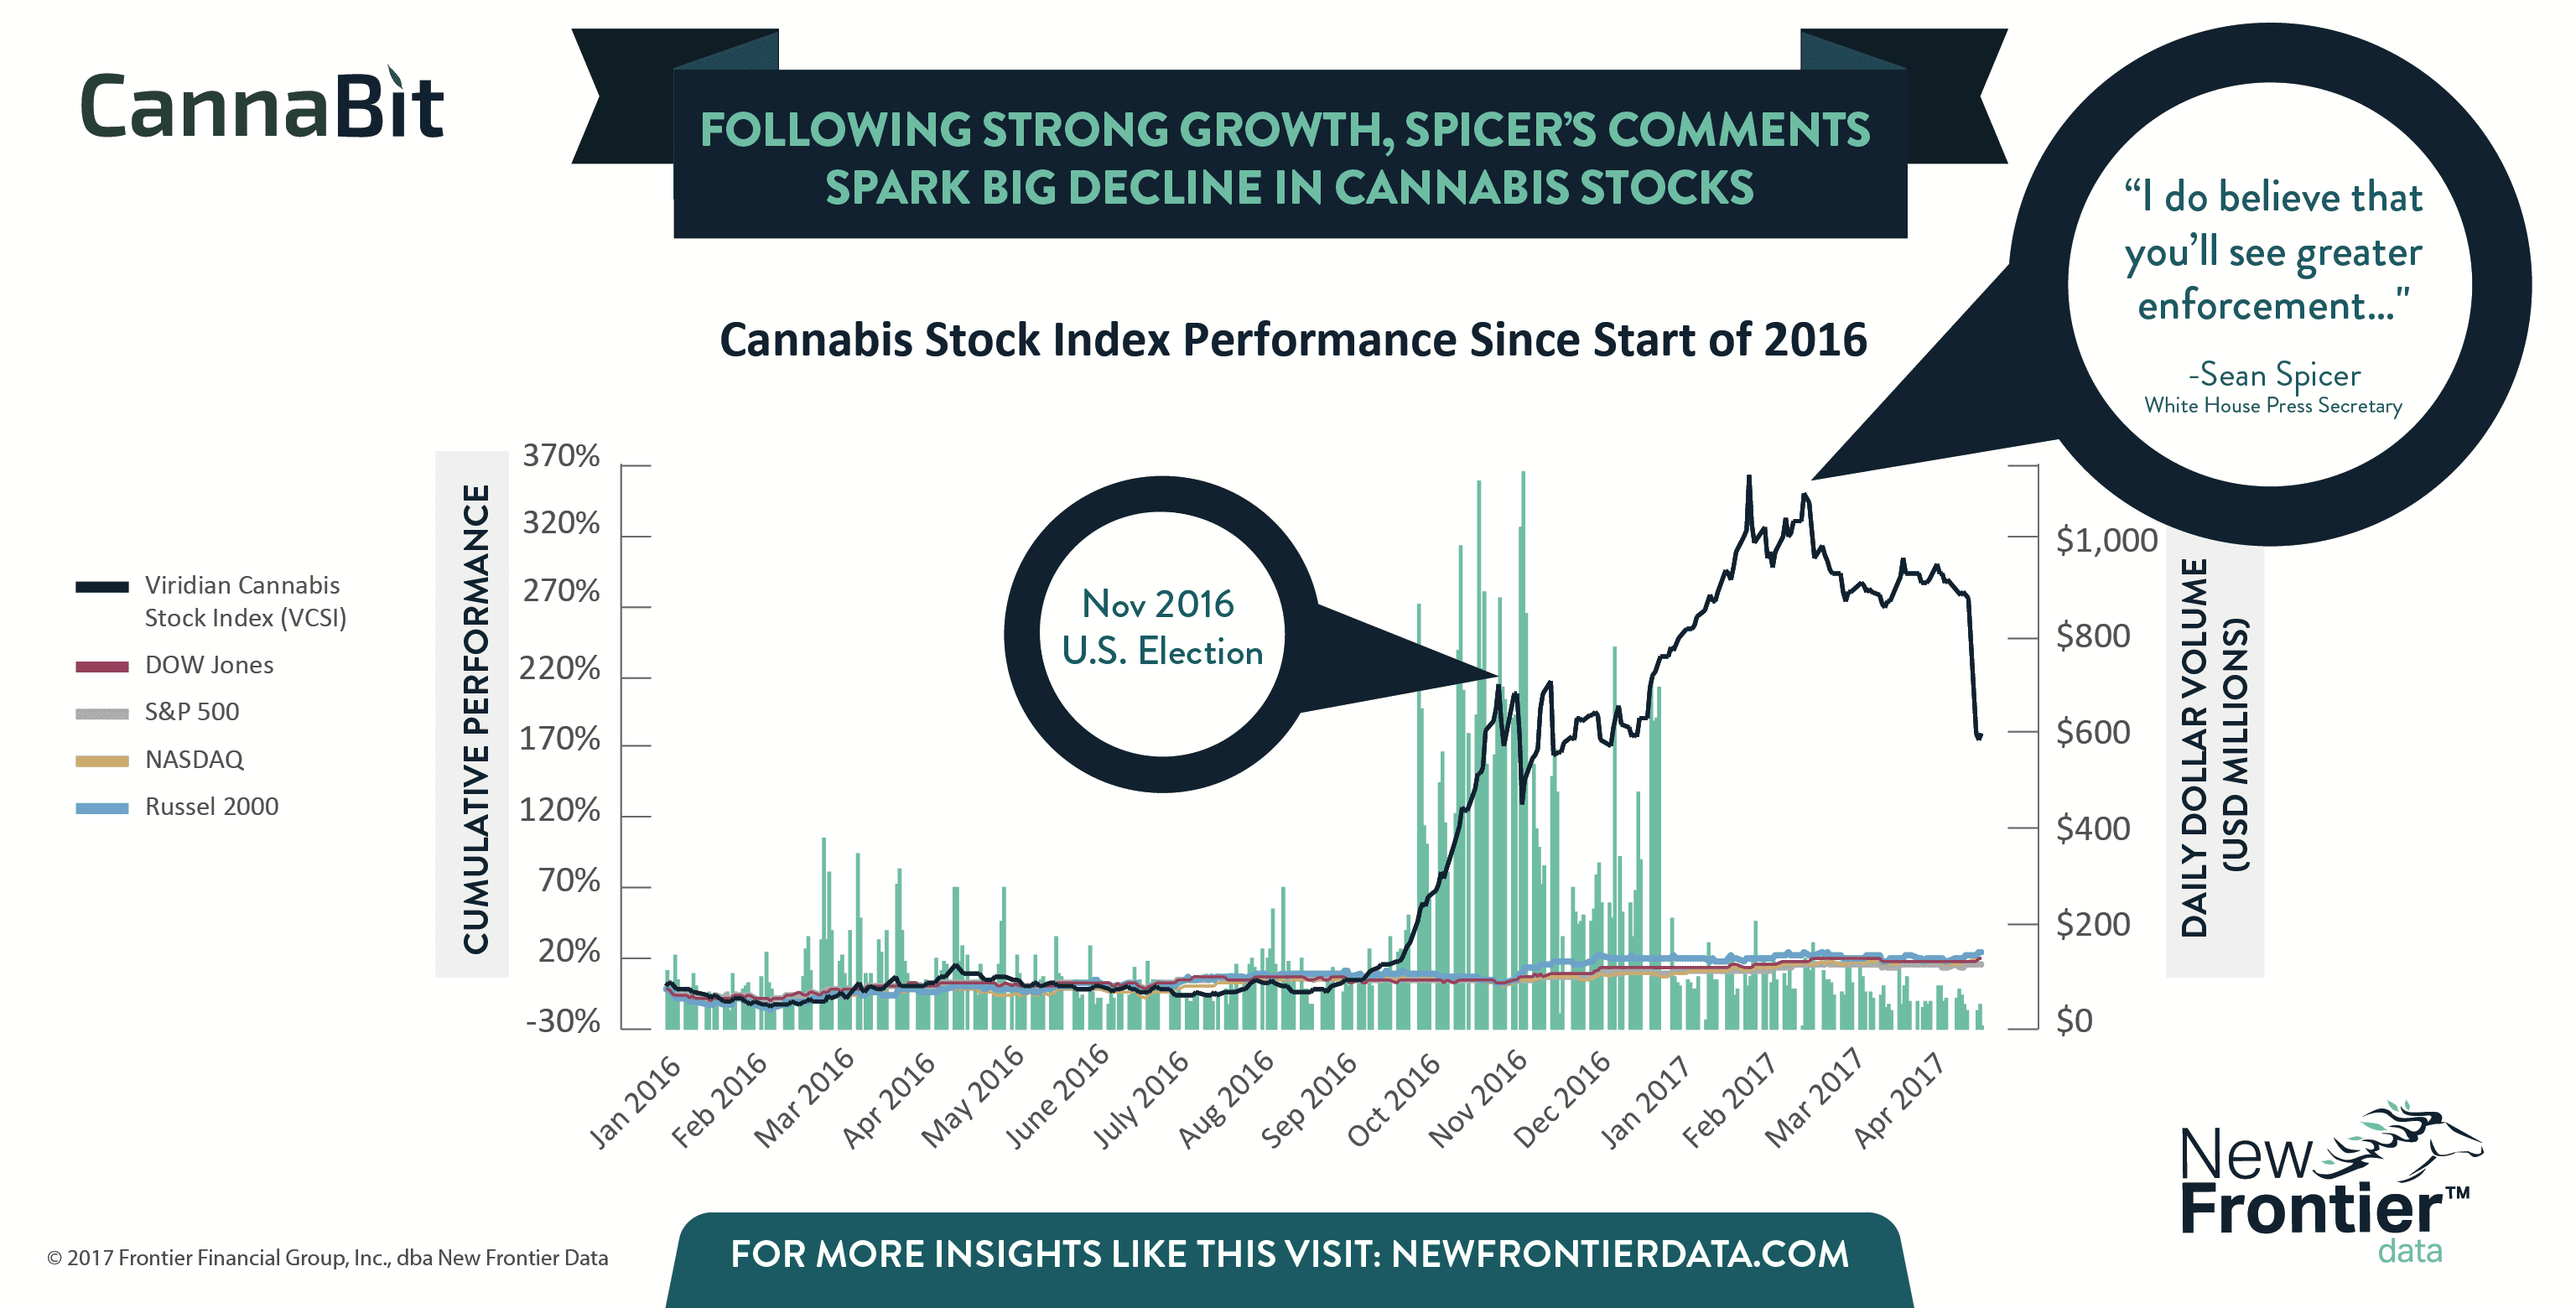 Cannabit: Following Strong Growth, Spicer's Comments Spark Big Decline in Cannabis Stocks/ 06172017